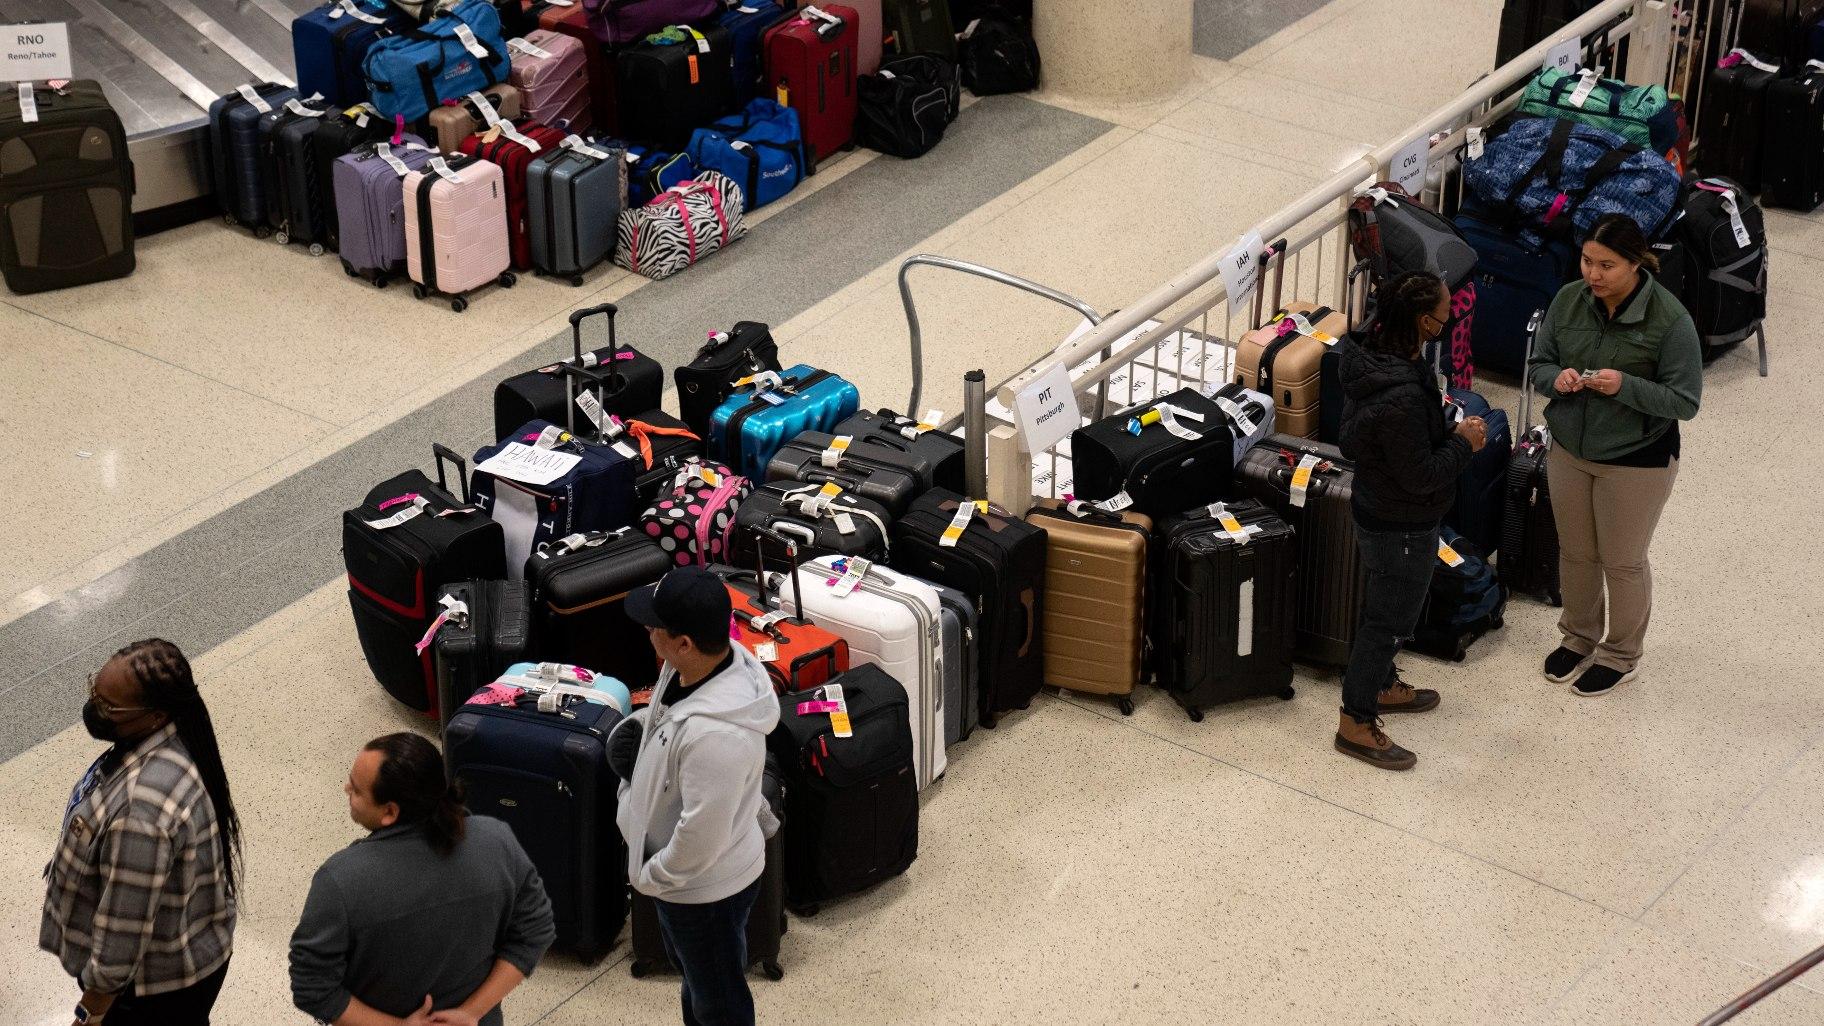 Hundreds of Southwest Airlines checked bags are piled together at baggage claim at Midway International Airport as Southwest continues to cancel thousands of flights across the country on Dec. 28, 2022, in Chicago. (AP Photo / Erin Hooley, File)